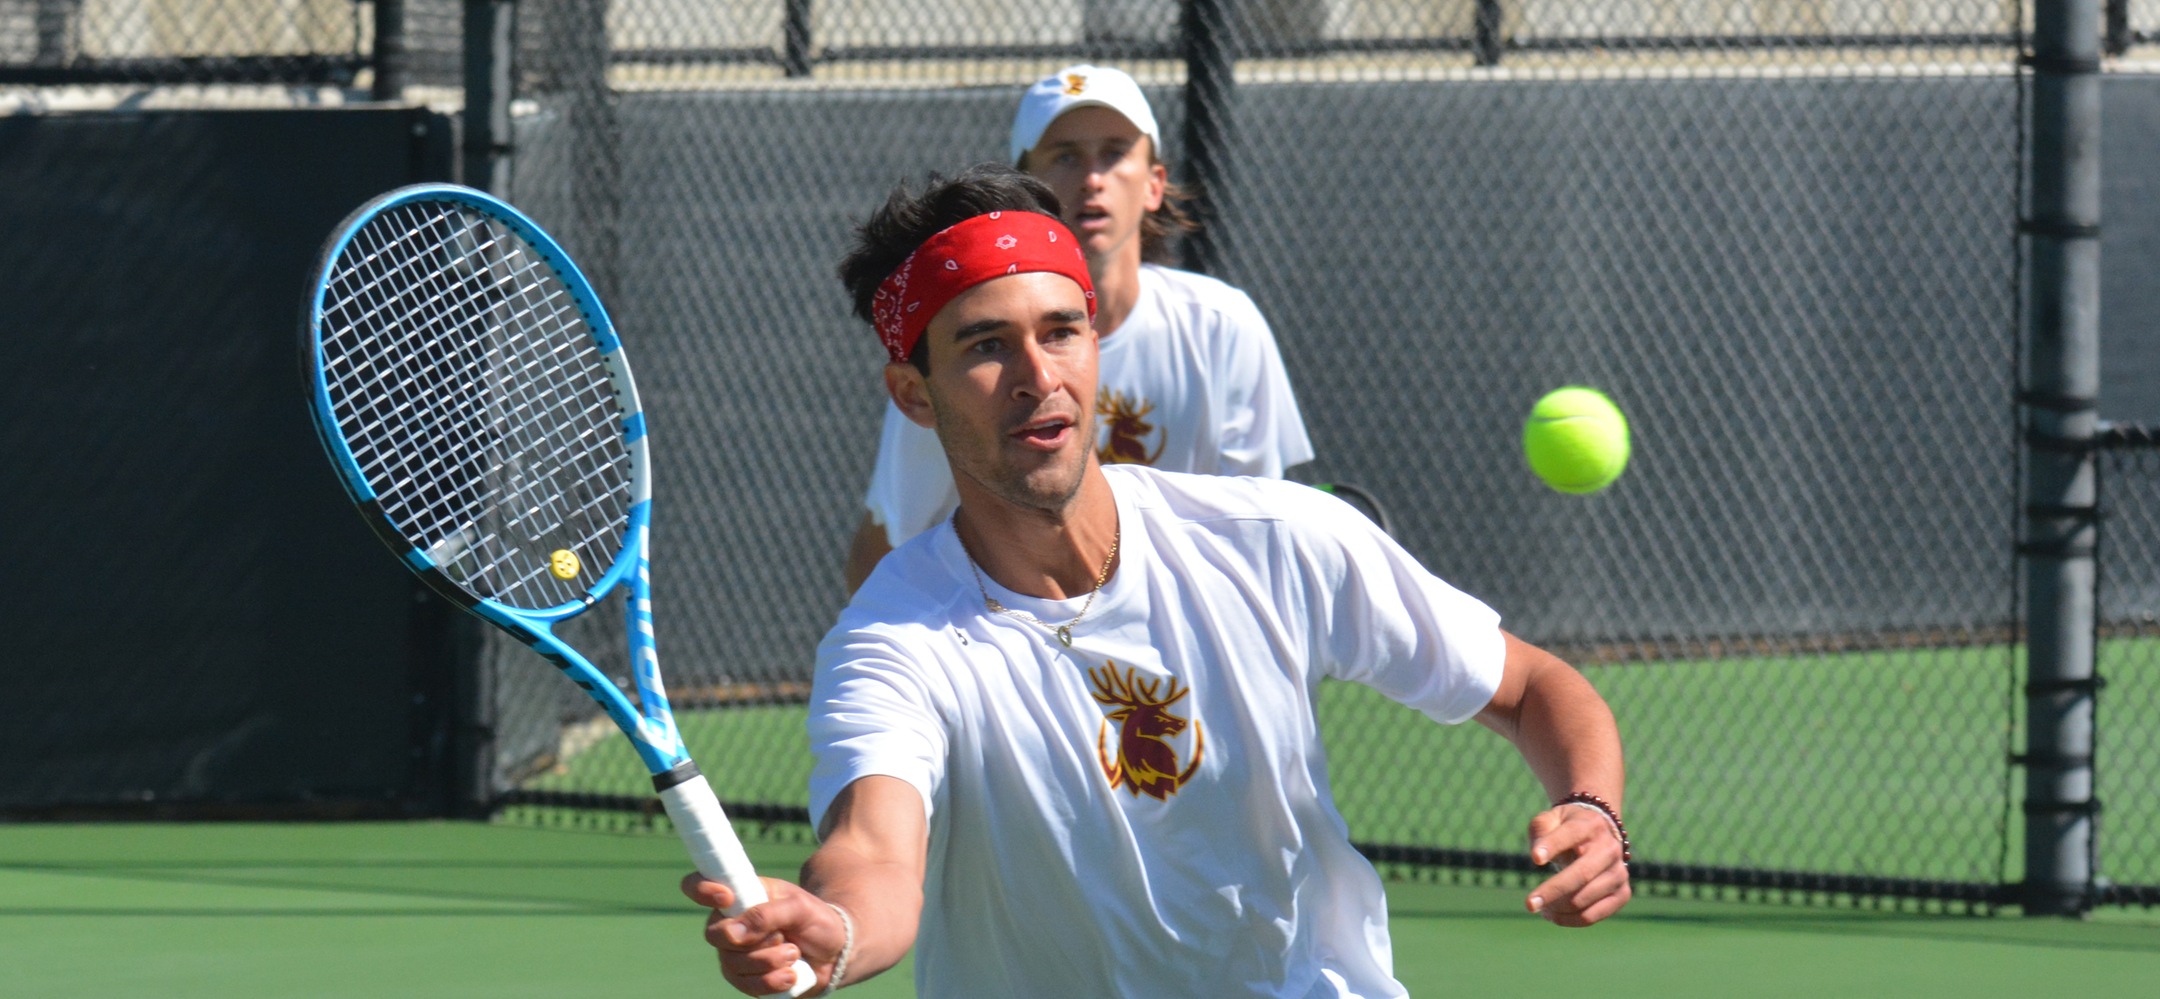 Juniors Jake Berber (CMC) and Jake Williams (HMC) clinched the doubles point with their 7-5 win at No. 3 doubles against Division II Western New Mexico on Tuesday.